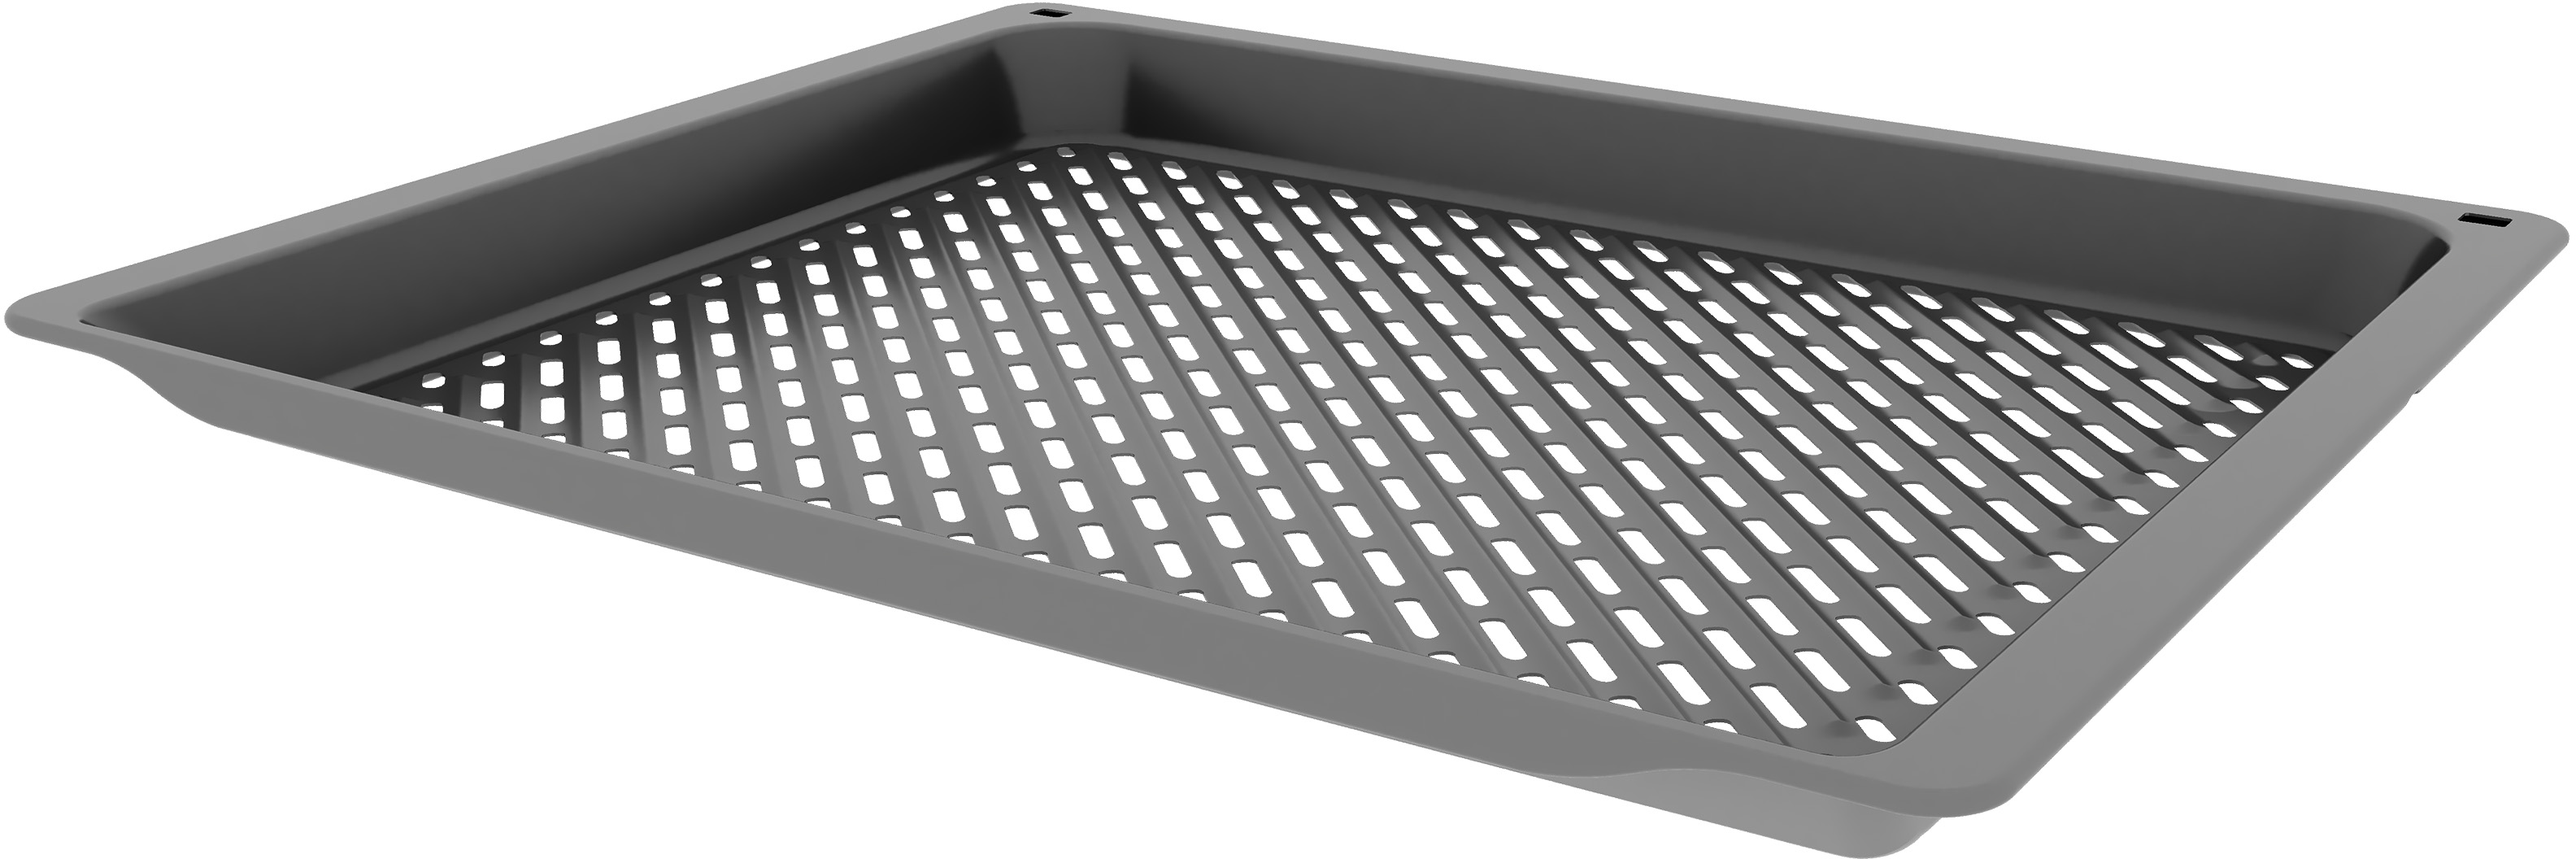 Air Fry & Grill tray , 38 x 455 x 375 mm, Anthracite, HEZ629070